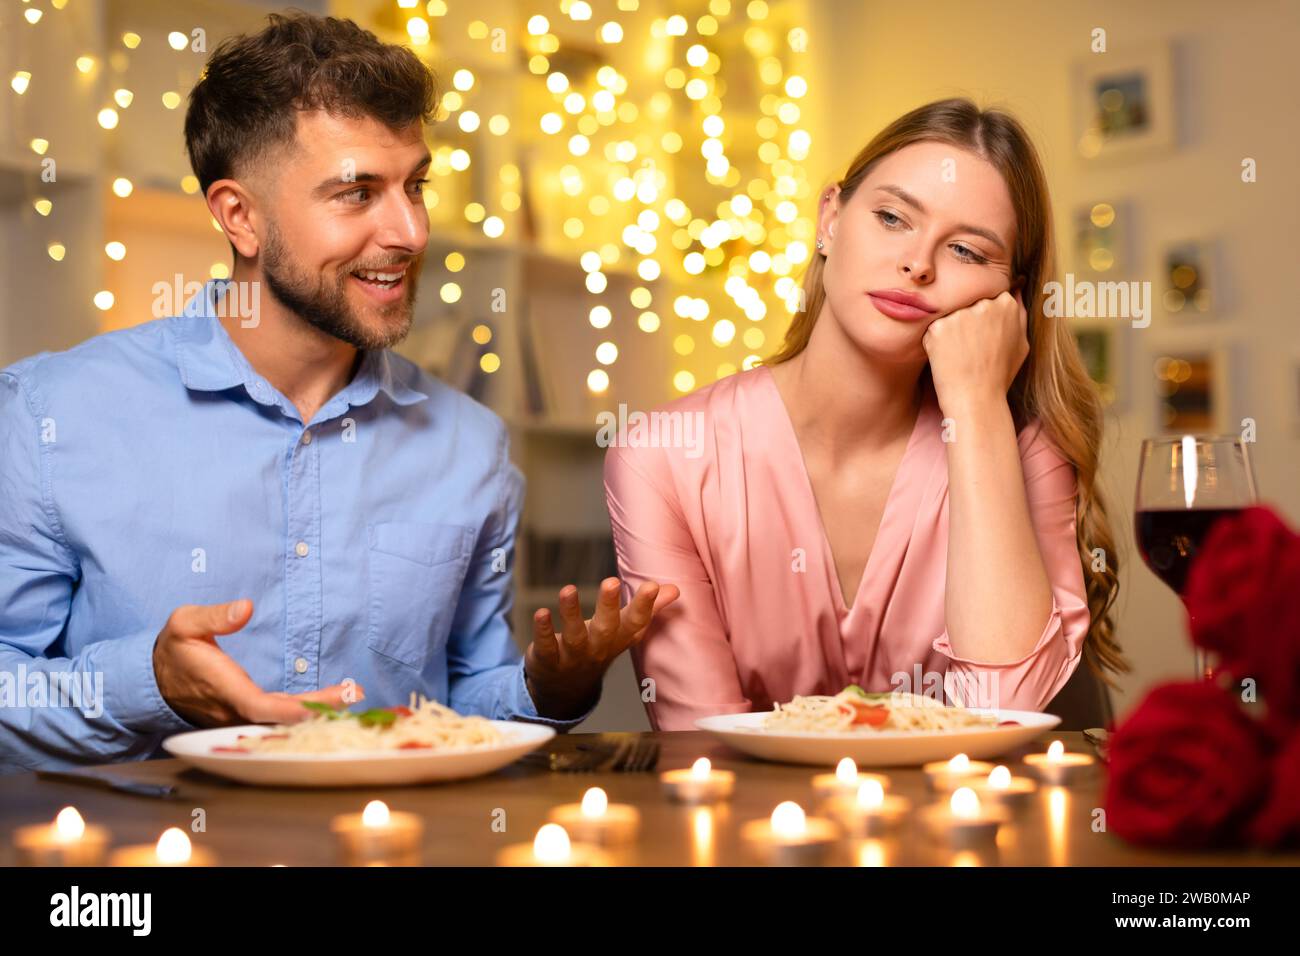 Man talking with hands, uninterested woman at dinner Stock Photo